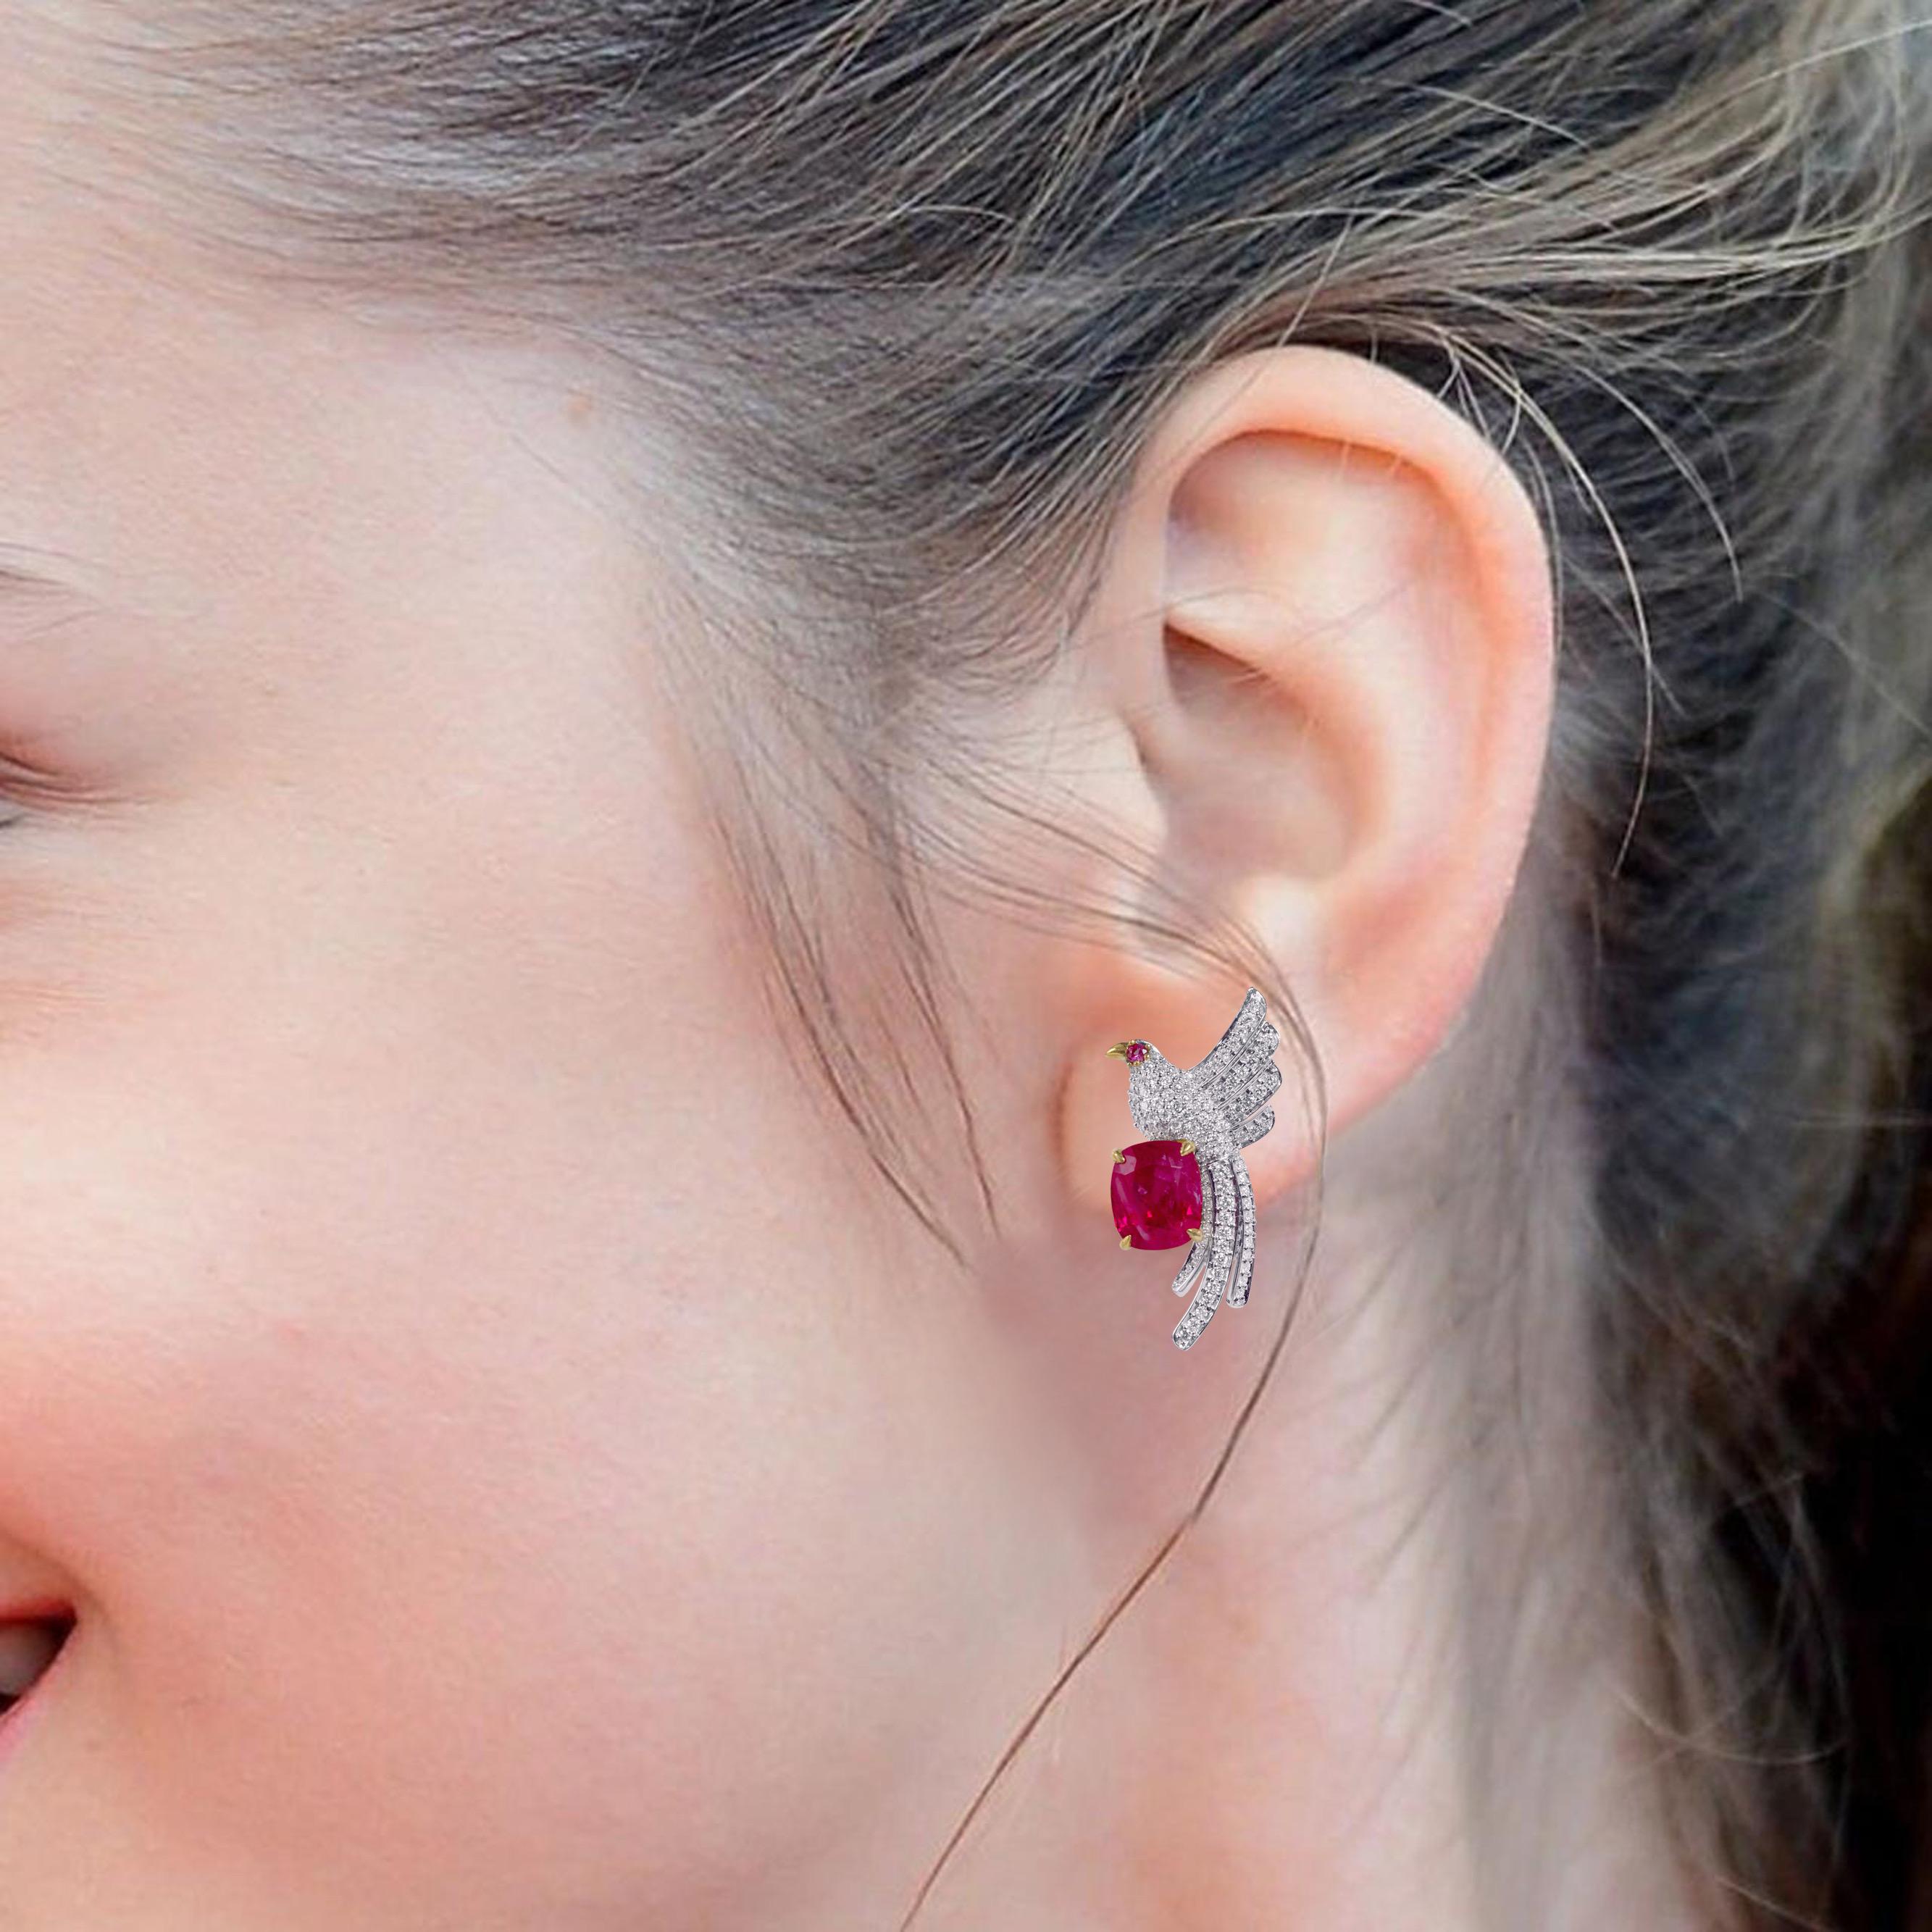 18 Karat Gold 3.67 Carat Natural Unheated Burmese Ruby and Diamond Stud Earrings

This special majestic royal parrot ruby stud-drop earring is a perfect example of the modern-day style. It’s simple yet artistic and characterizes the natural